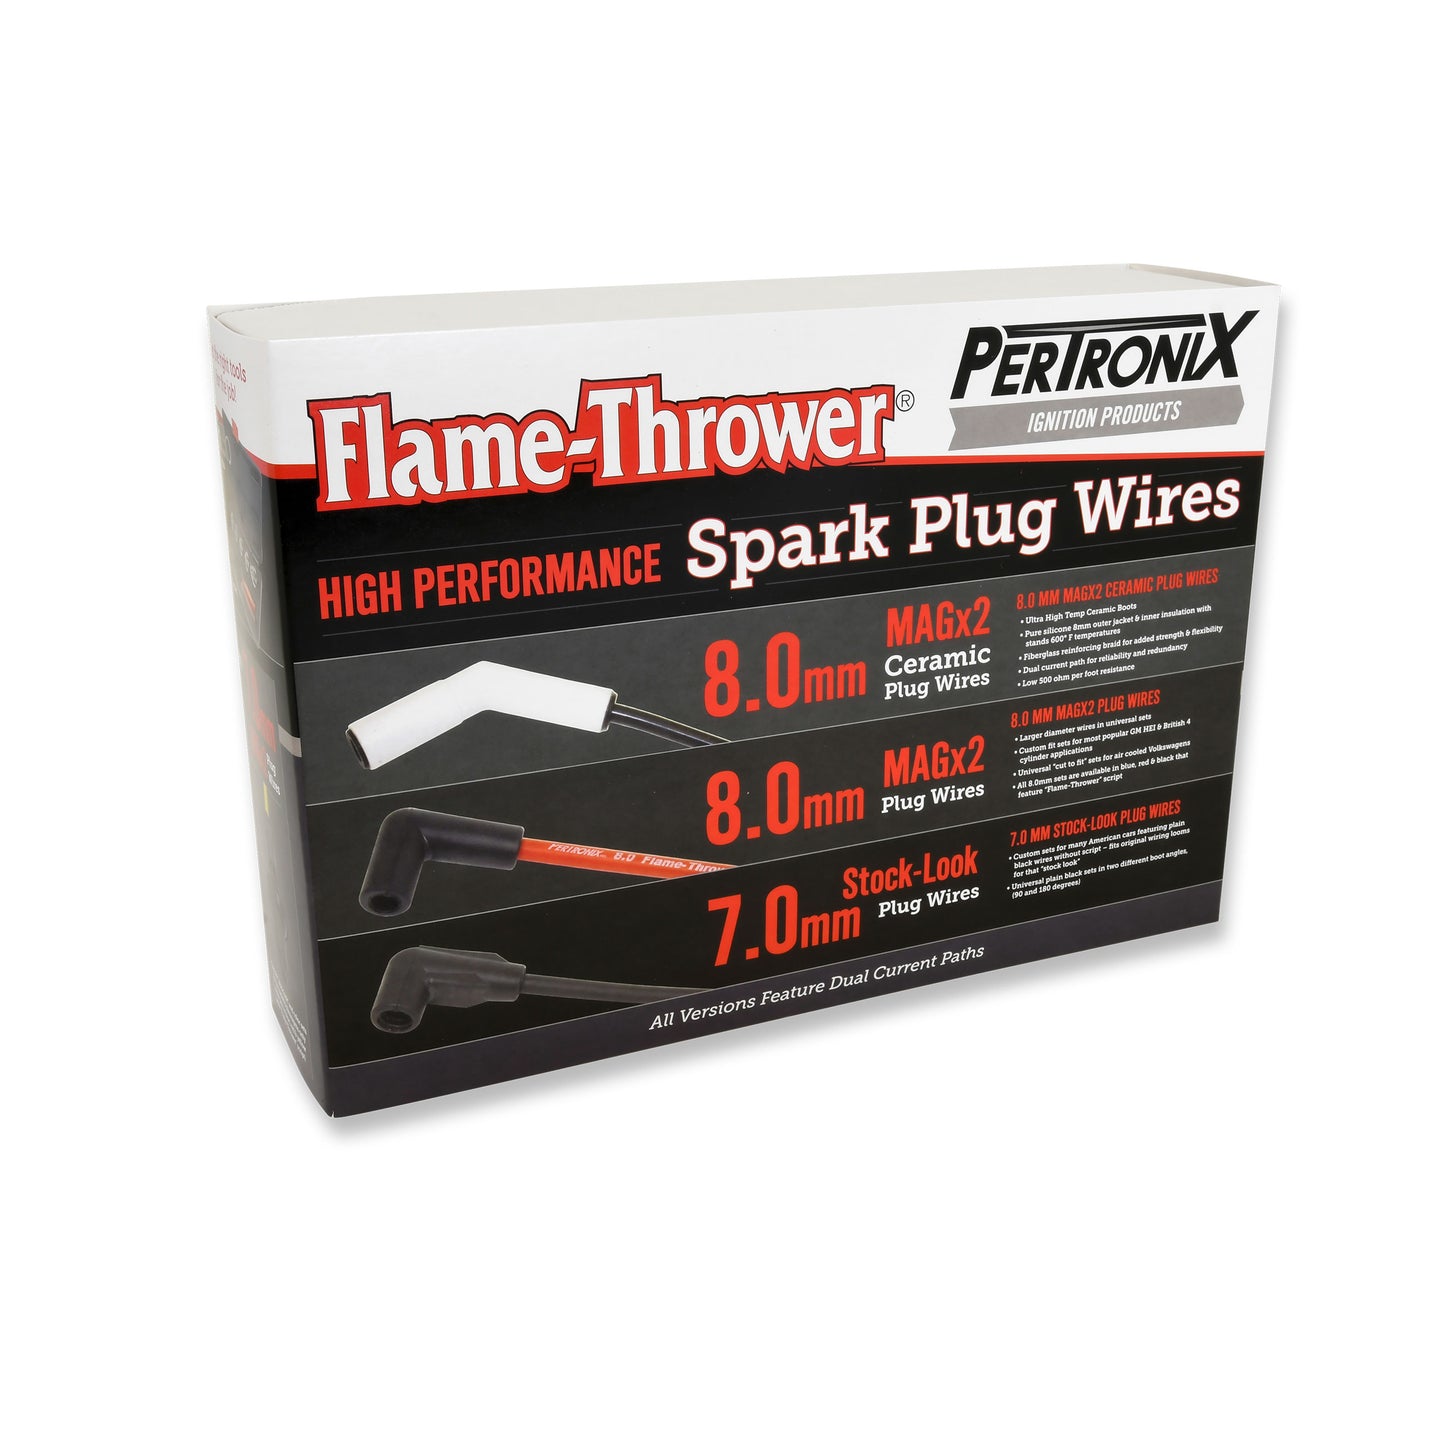 PerTronix 808215HT Flame-Thrower Spark Plug Wires 8 cyl 8mm Universal 45 Degree Ceramic Boot Black Wire